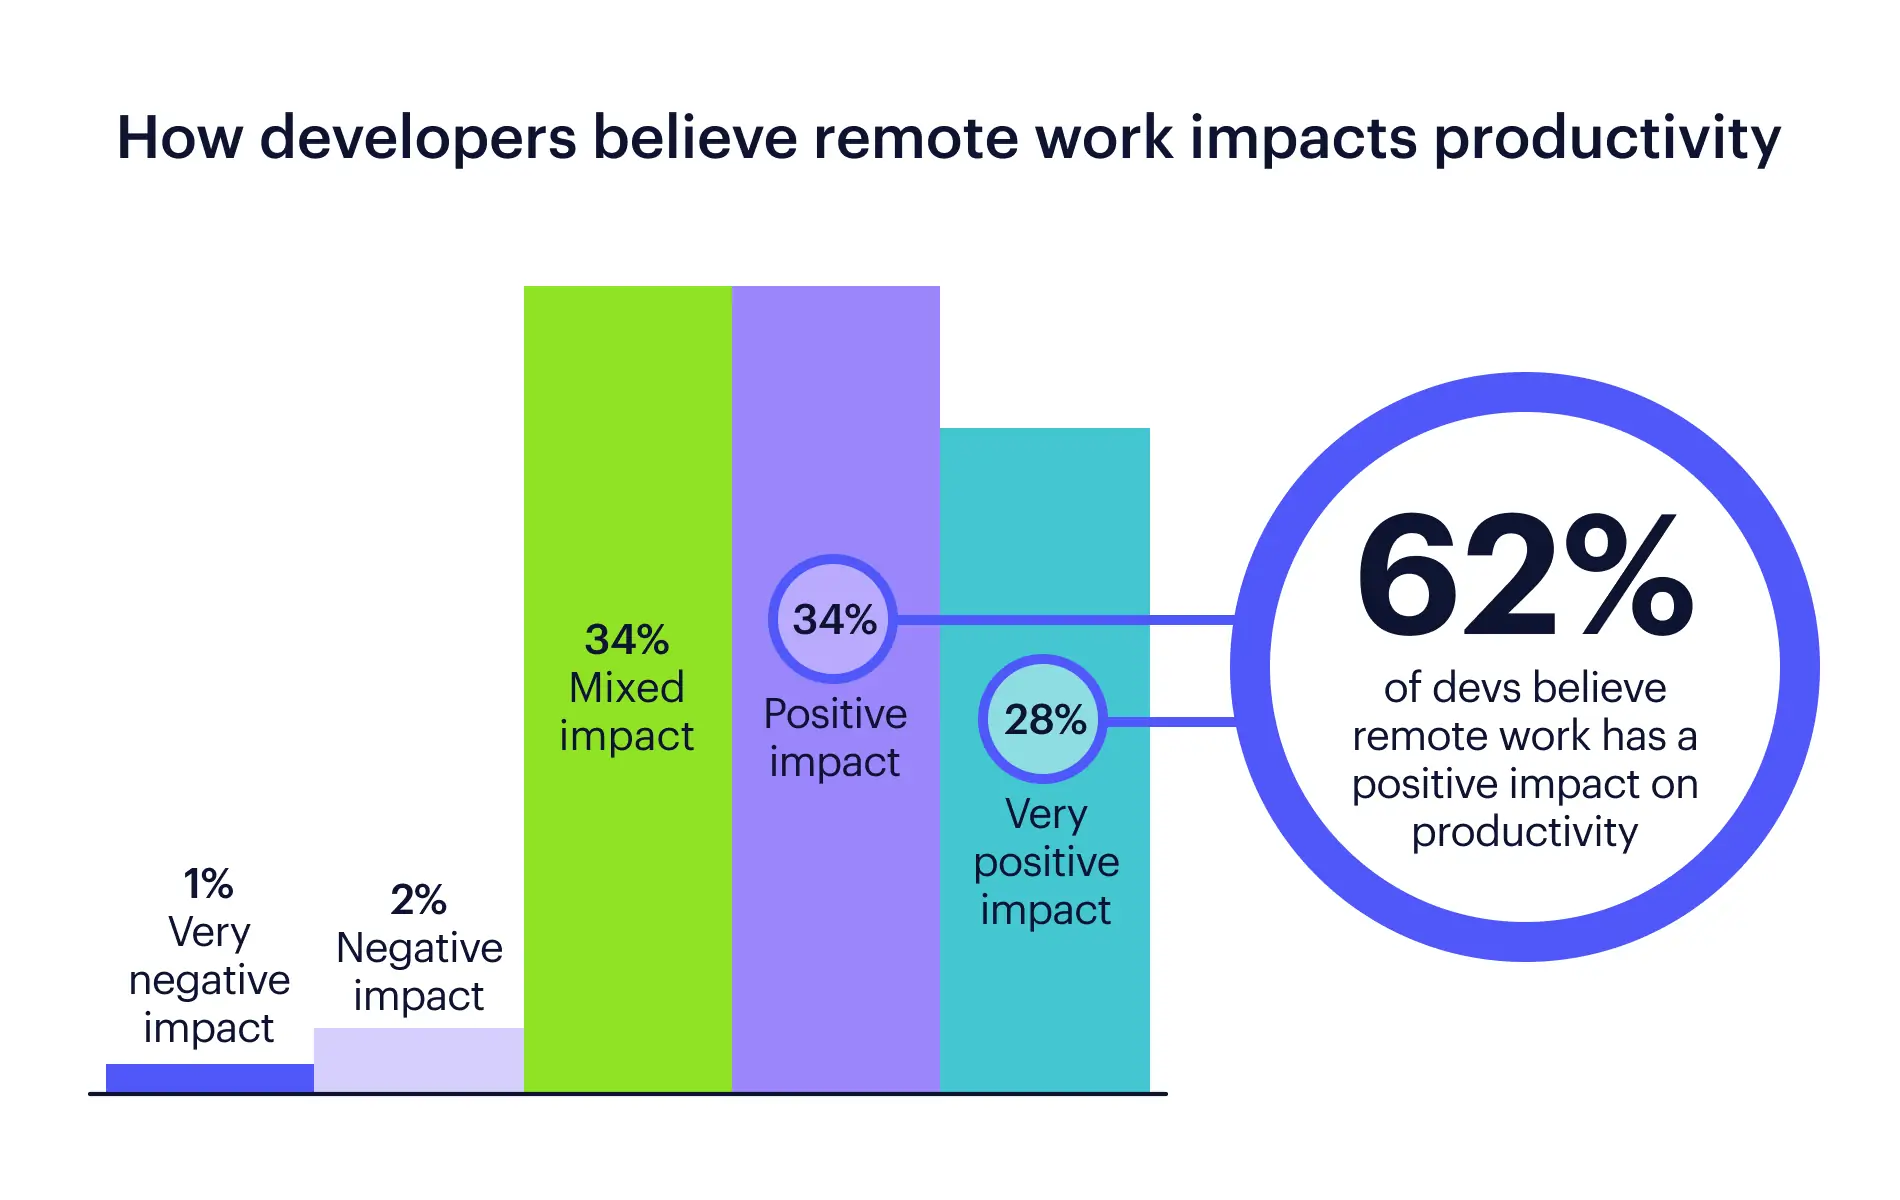 62 percent of devs believe remote work has a positive impact on productivity